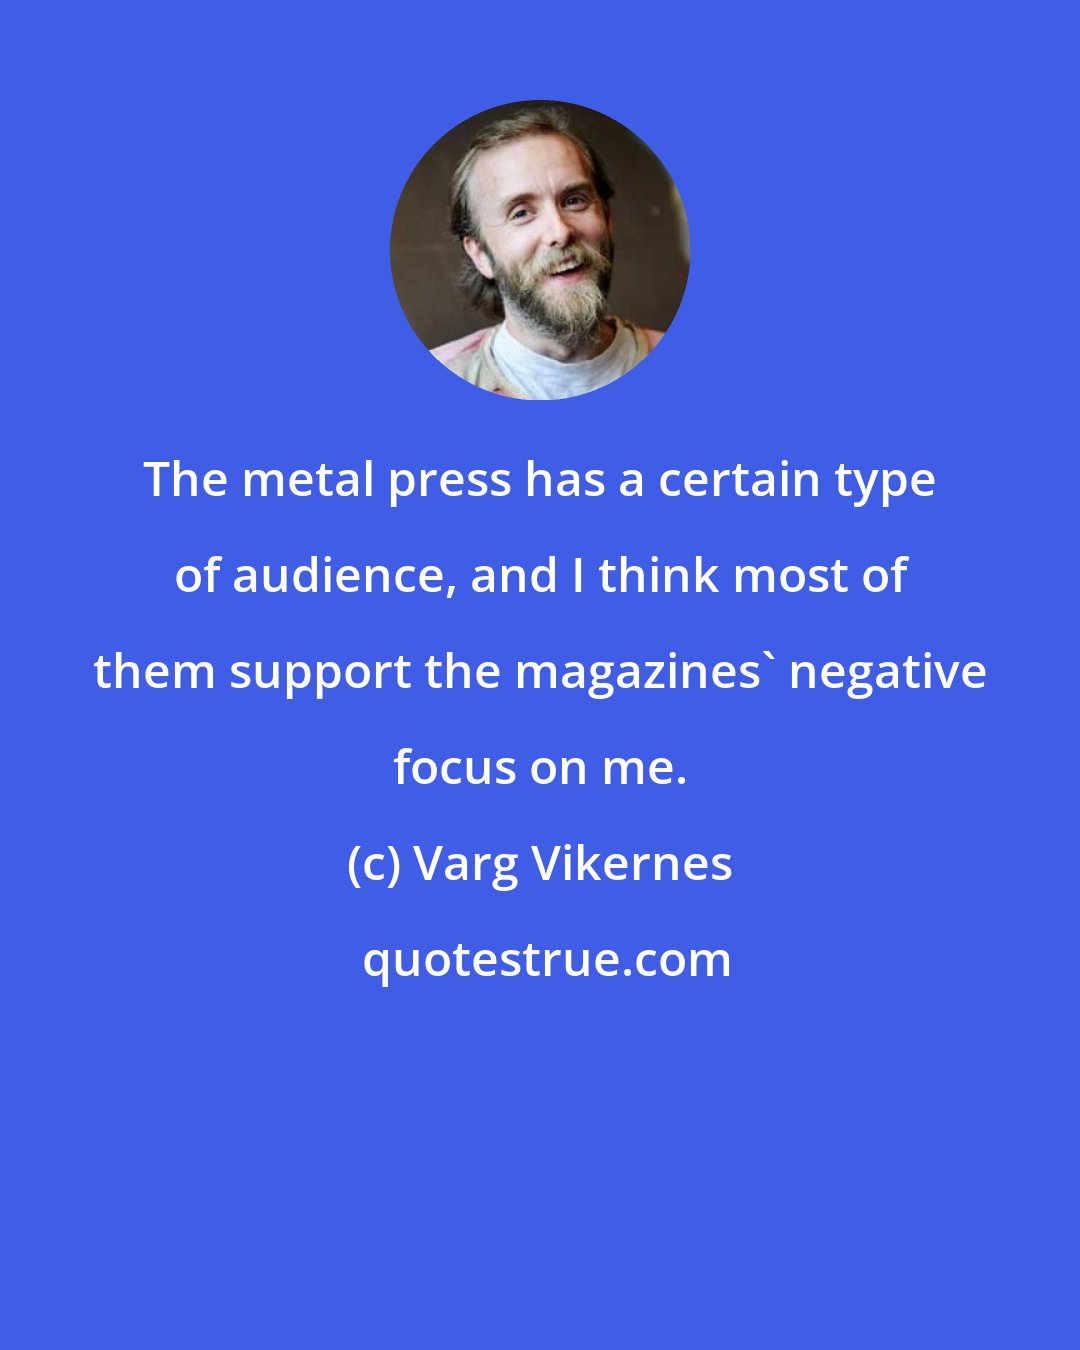 Varg Vikernes: The metal press has a certain type of audience, and I think most of them support the magazines' negative focus on me.